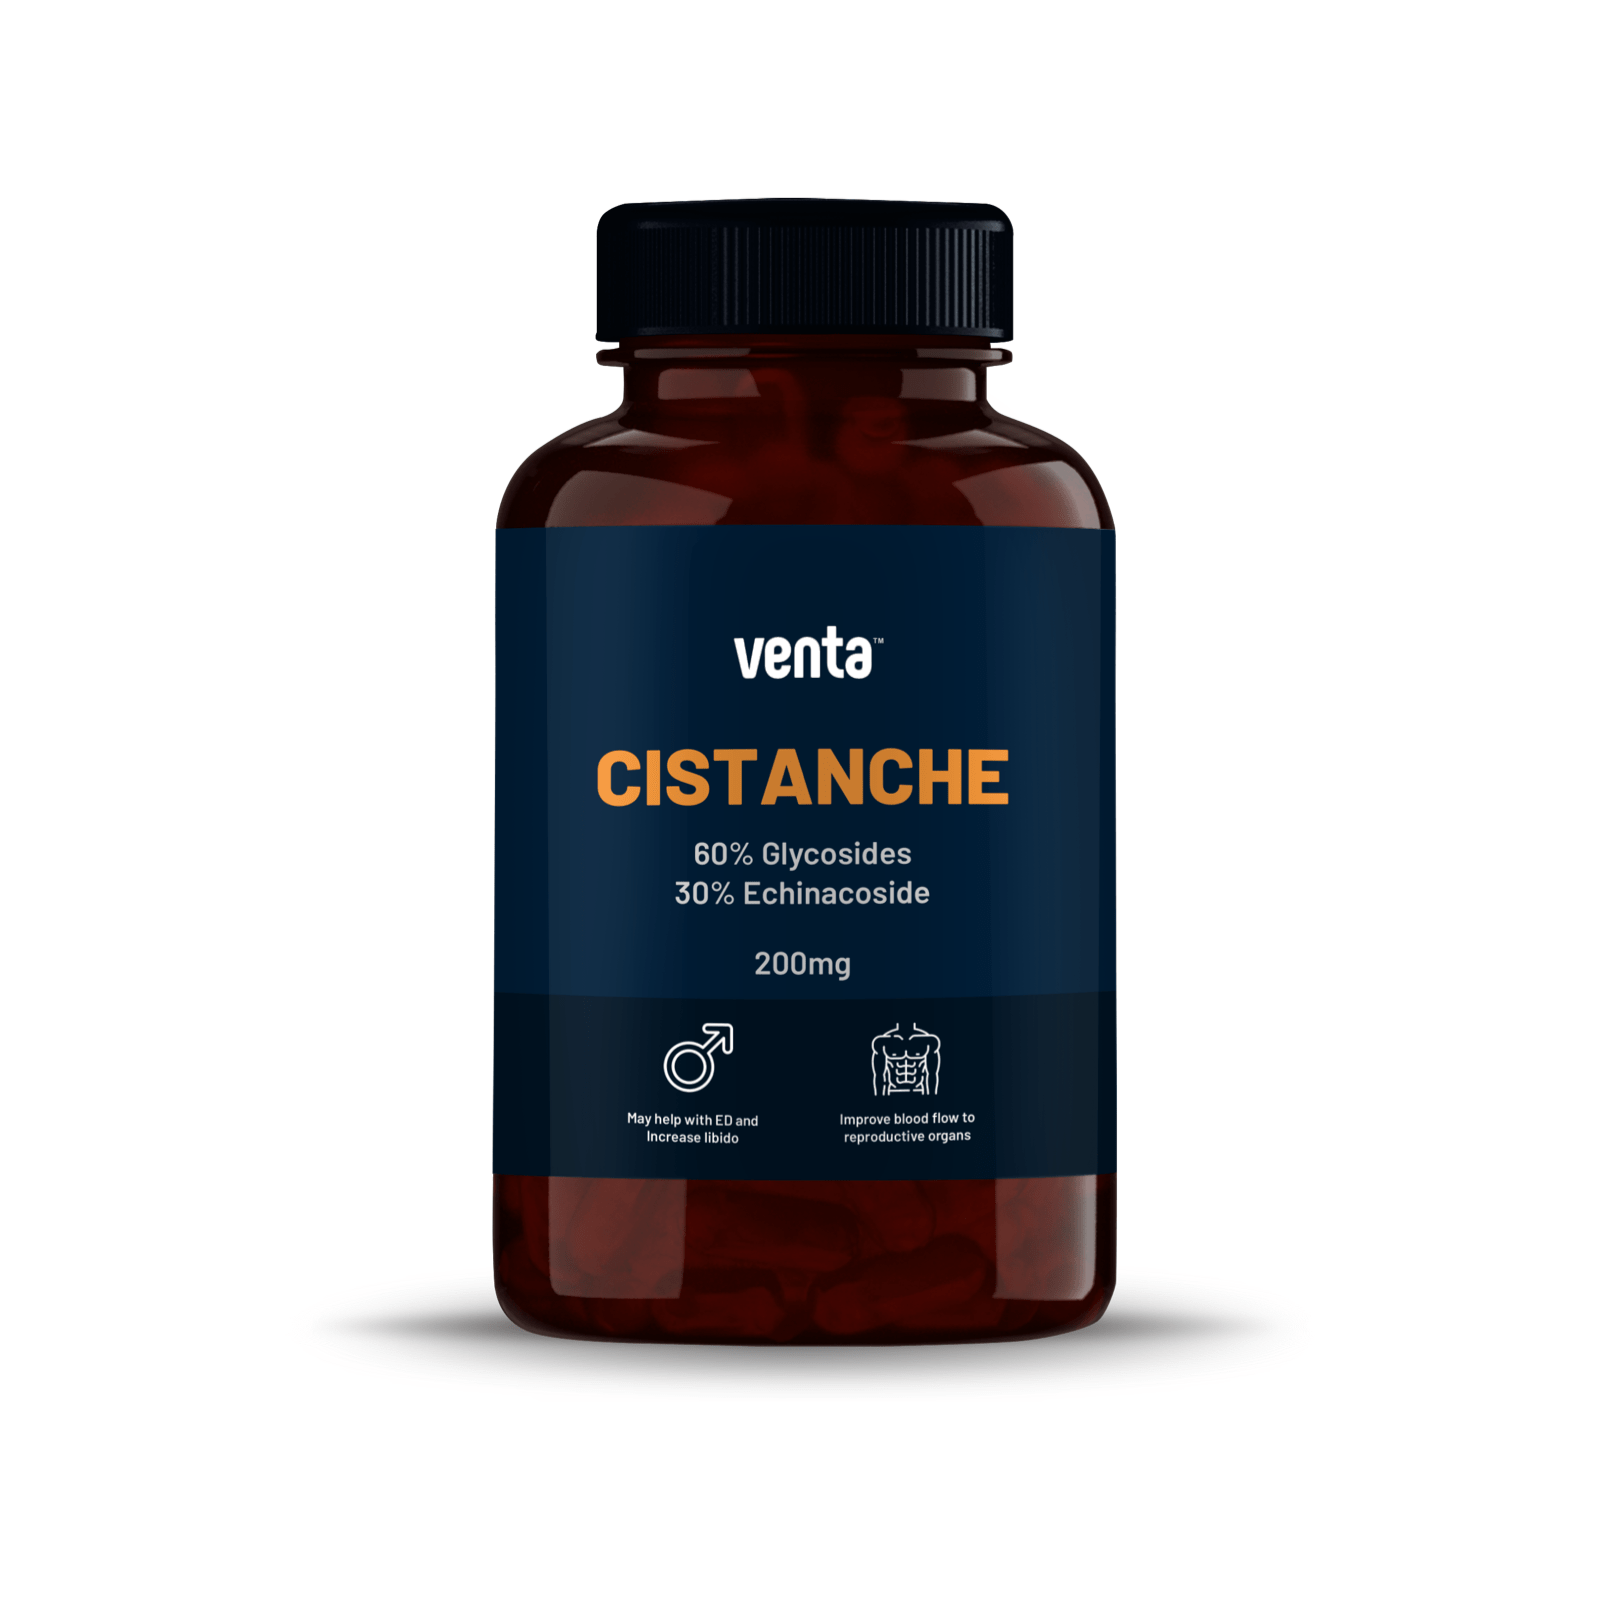 Cistanche Tubulosa - Anti-ageing, fertility, Increased Blood Flow - Venta